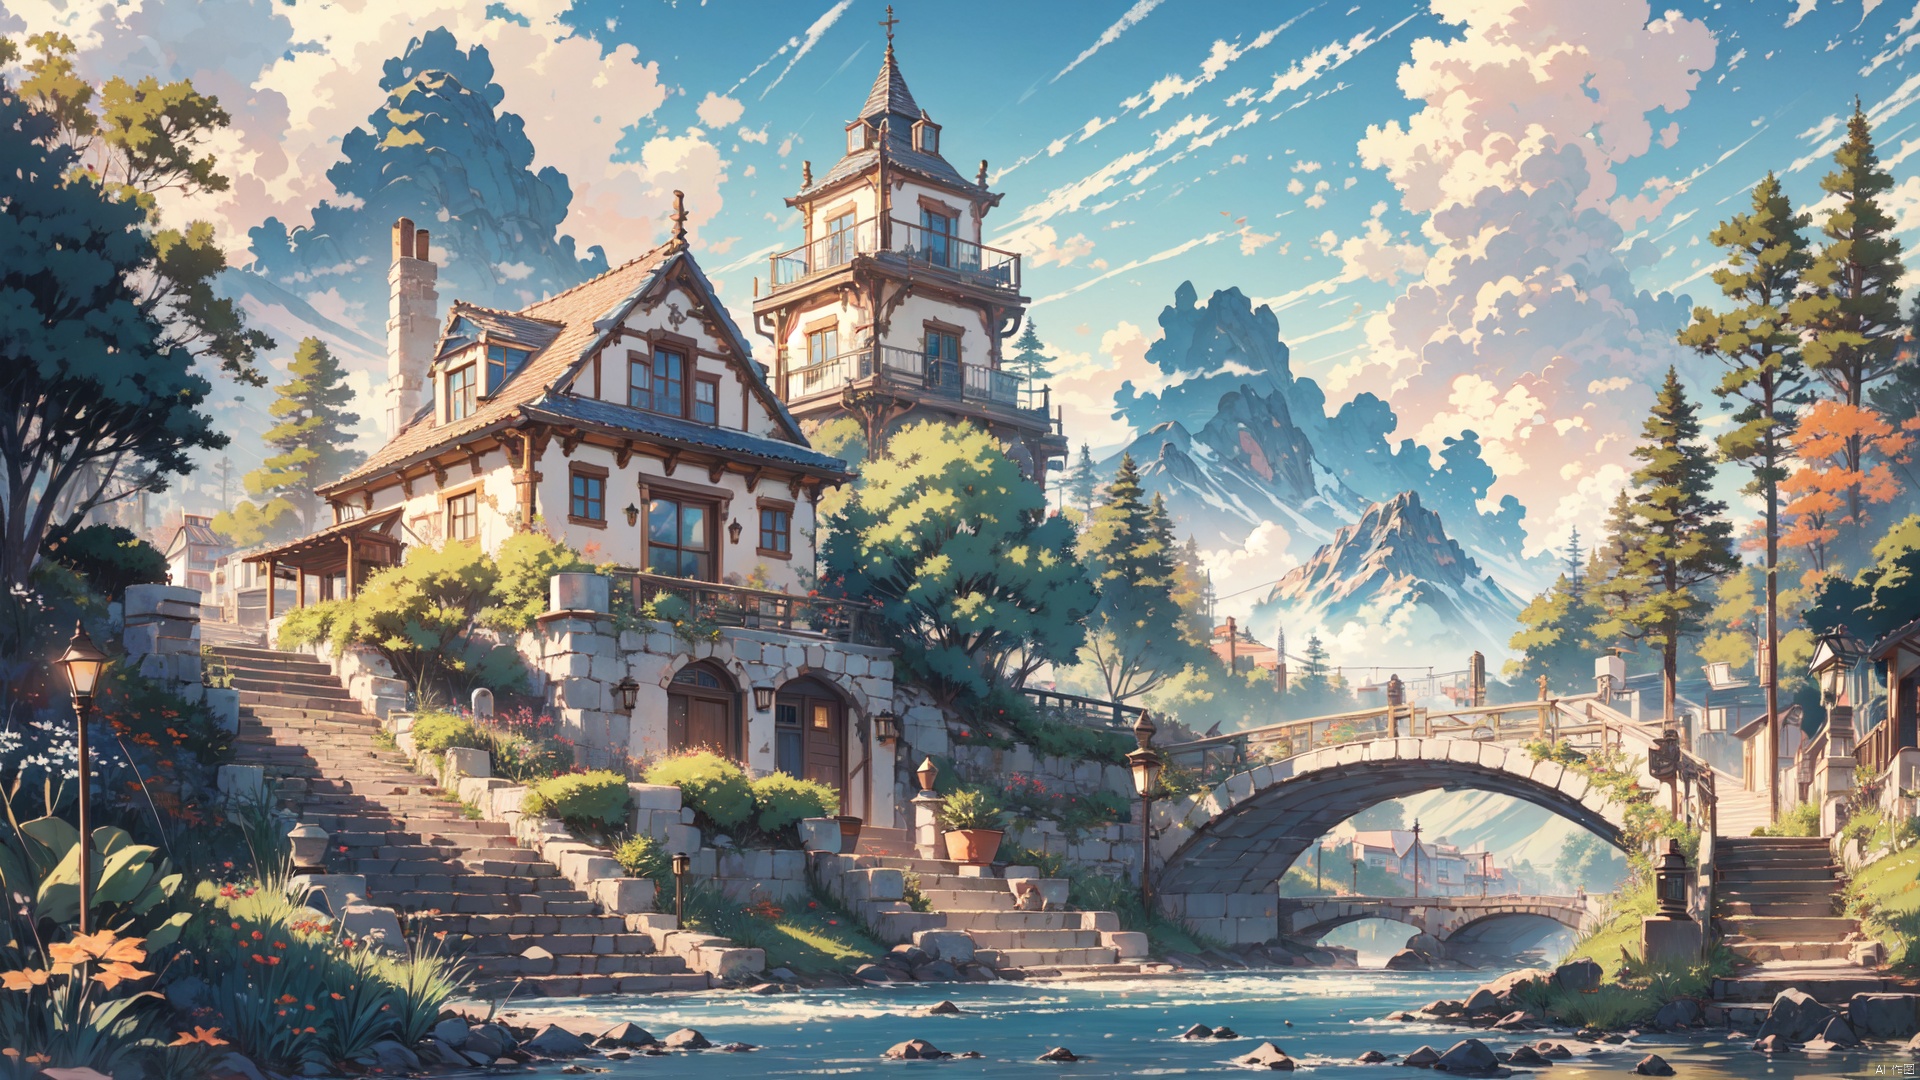  (masterpiece:1.2), best quality,UE5,scenery,(no humans:1.2), Anime, multi-layered composition,
 
cloud, sky, outdoors, day, cloudy sky, fantasy, stairs, blue sky,mountain, door,grassland, bridge, 2D ConceptualDesign, blue archive background, cozy animation scenes